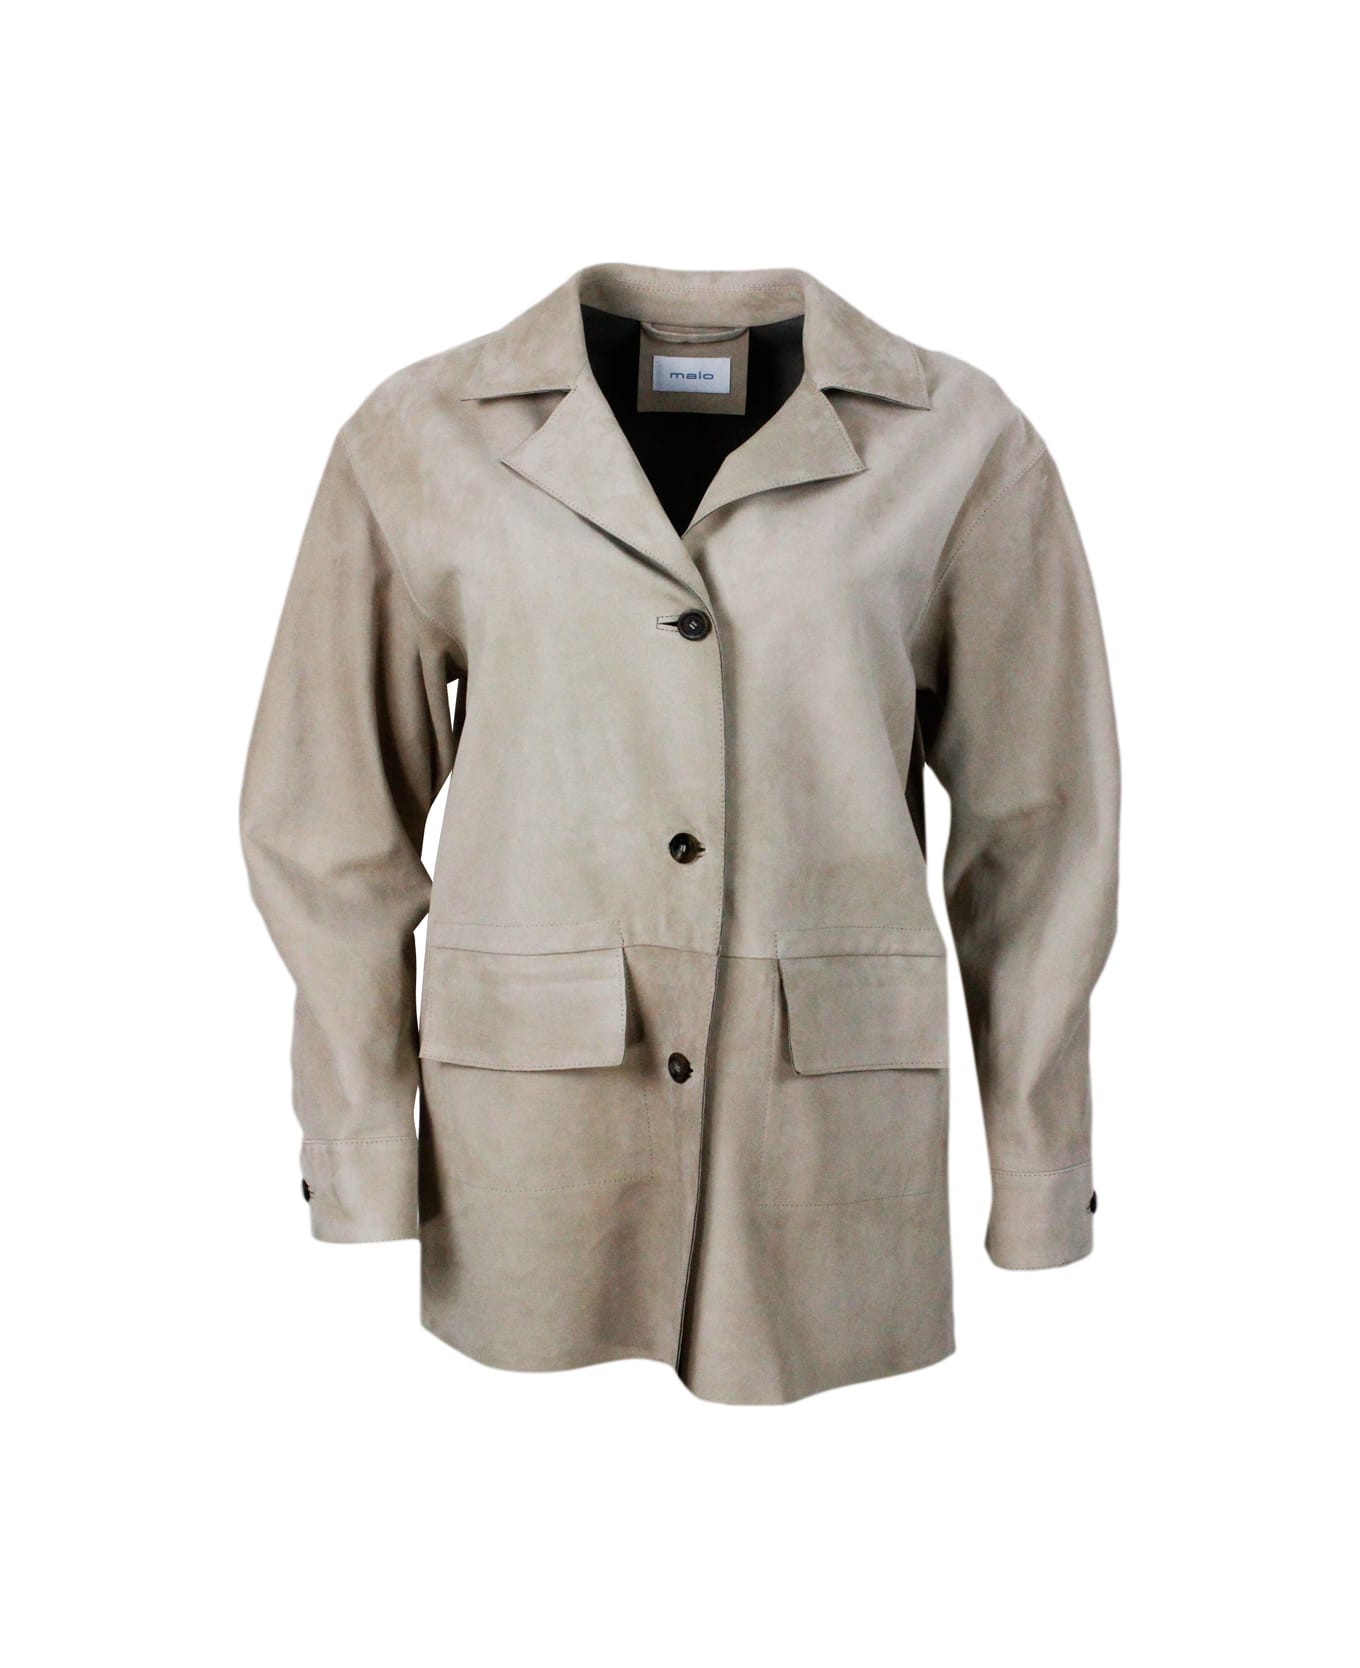 Malo Relaxed Fit Soft Suede Jacket With Patch Pockets And Three-button Closure. - Beige